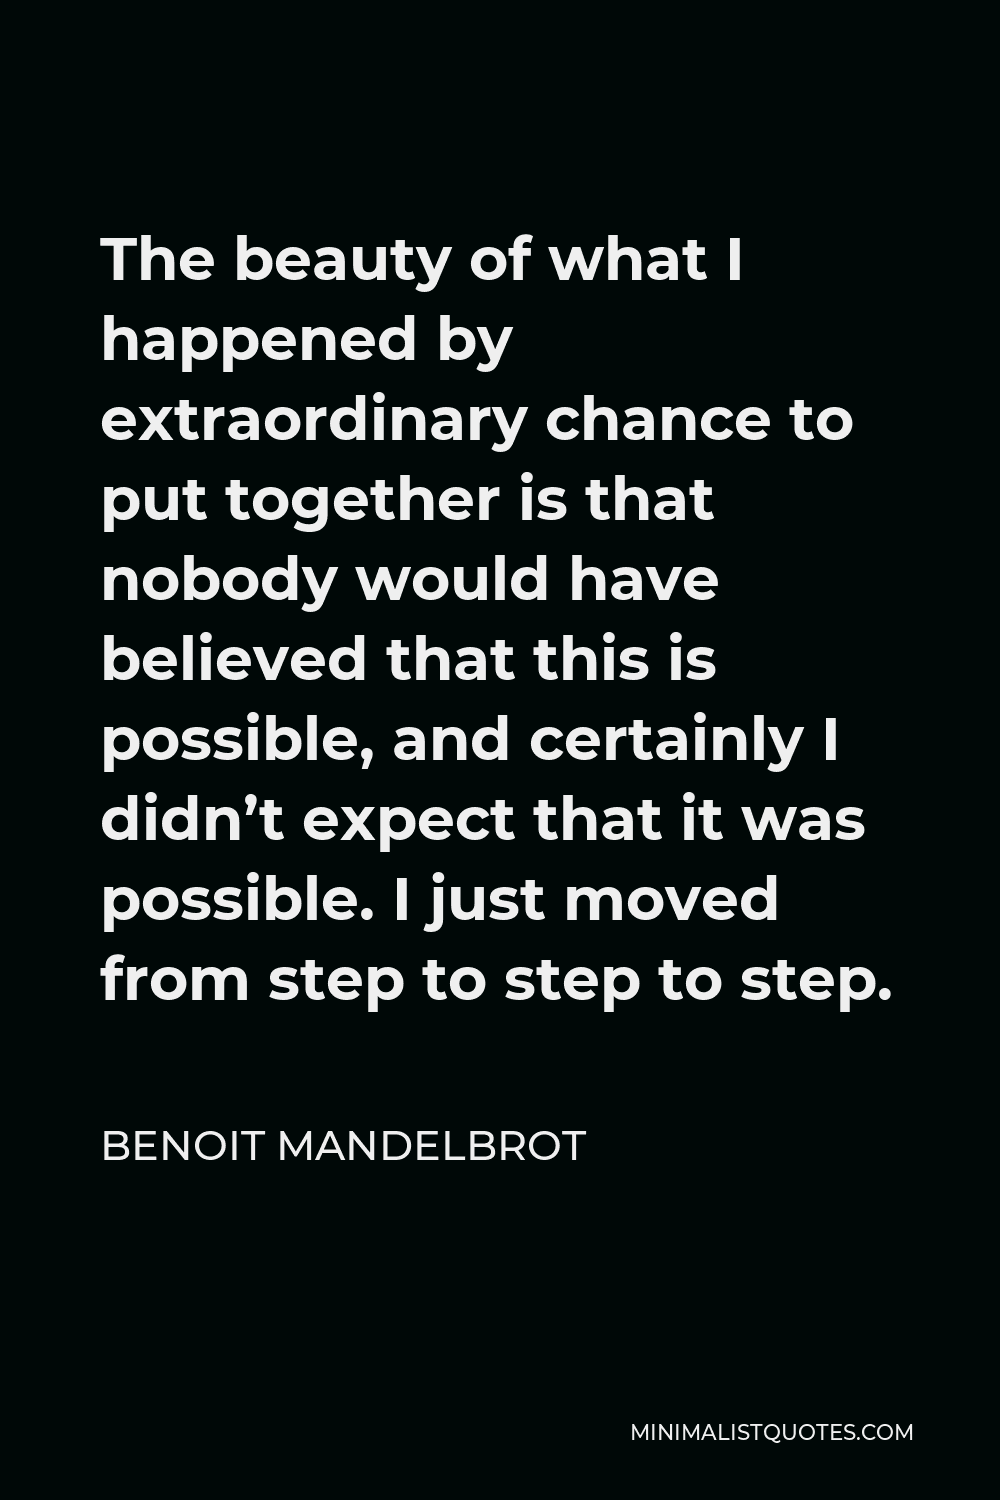 Benoit Mandelbrot Quote - The beauty of what I happened by extraordinary chance to put together is that nobody would have believed that this is possible, and certainly I didn’t expect that it was possible. I just moved from step to step to step.